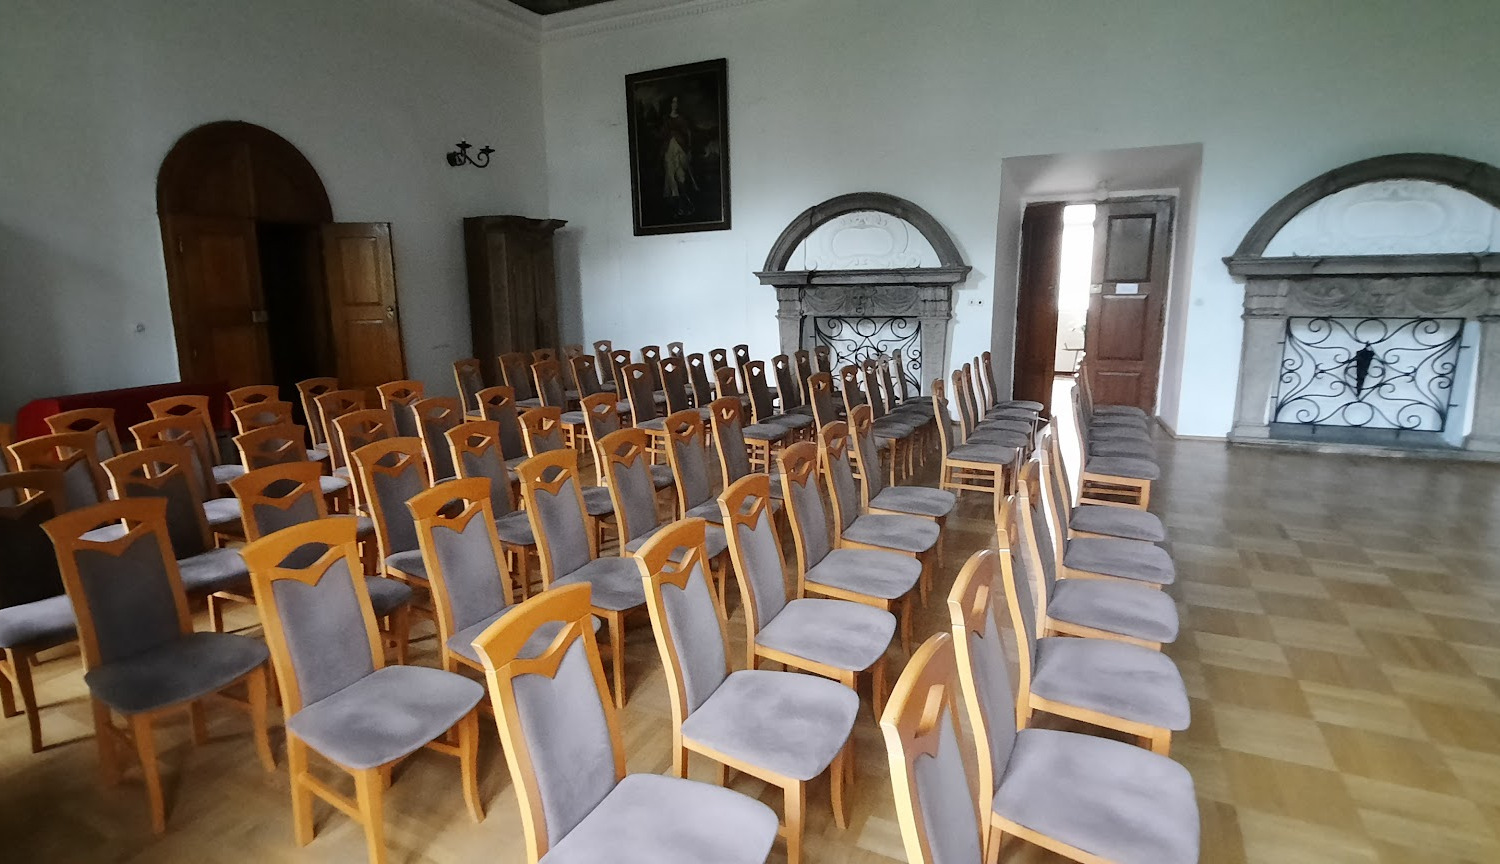 The lecture room